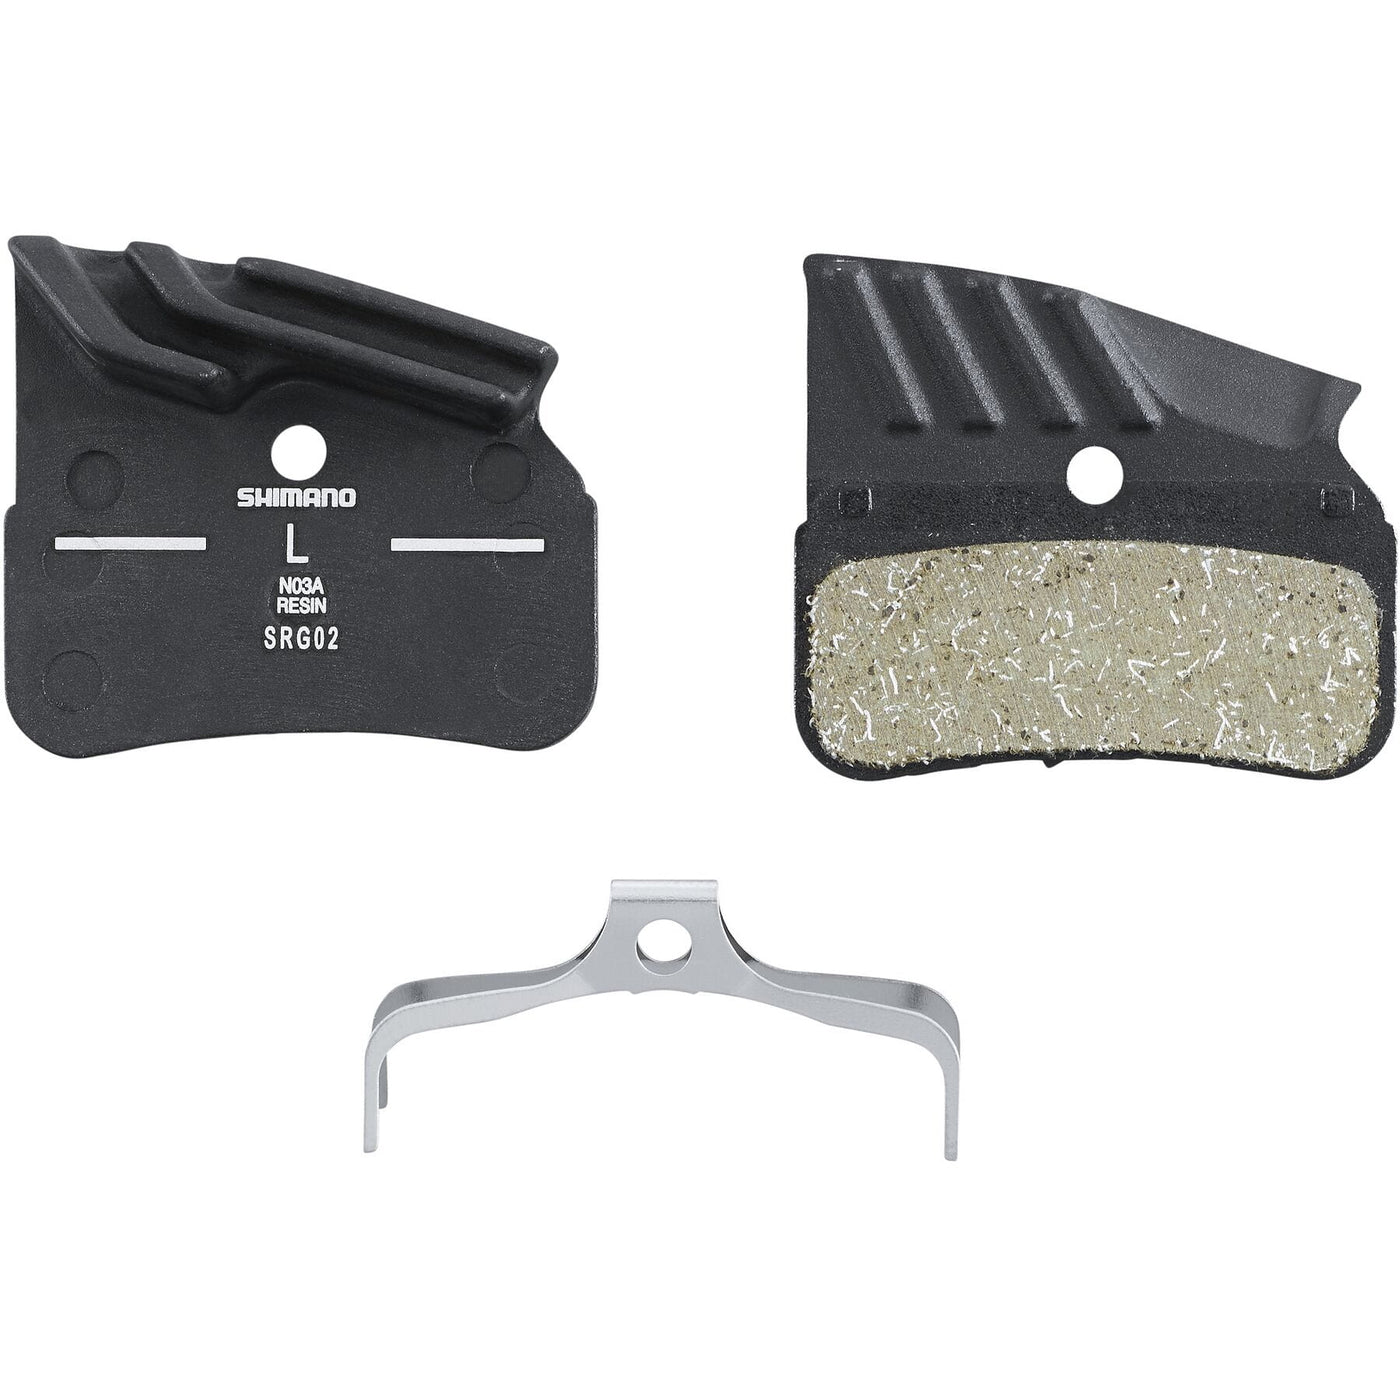 SHIMANO N03A disc pads and spring with cooling fins, Resin